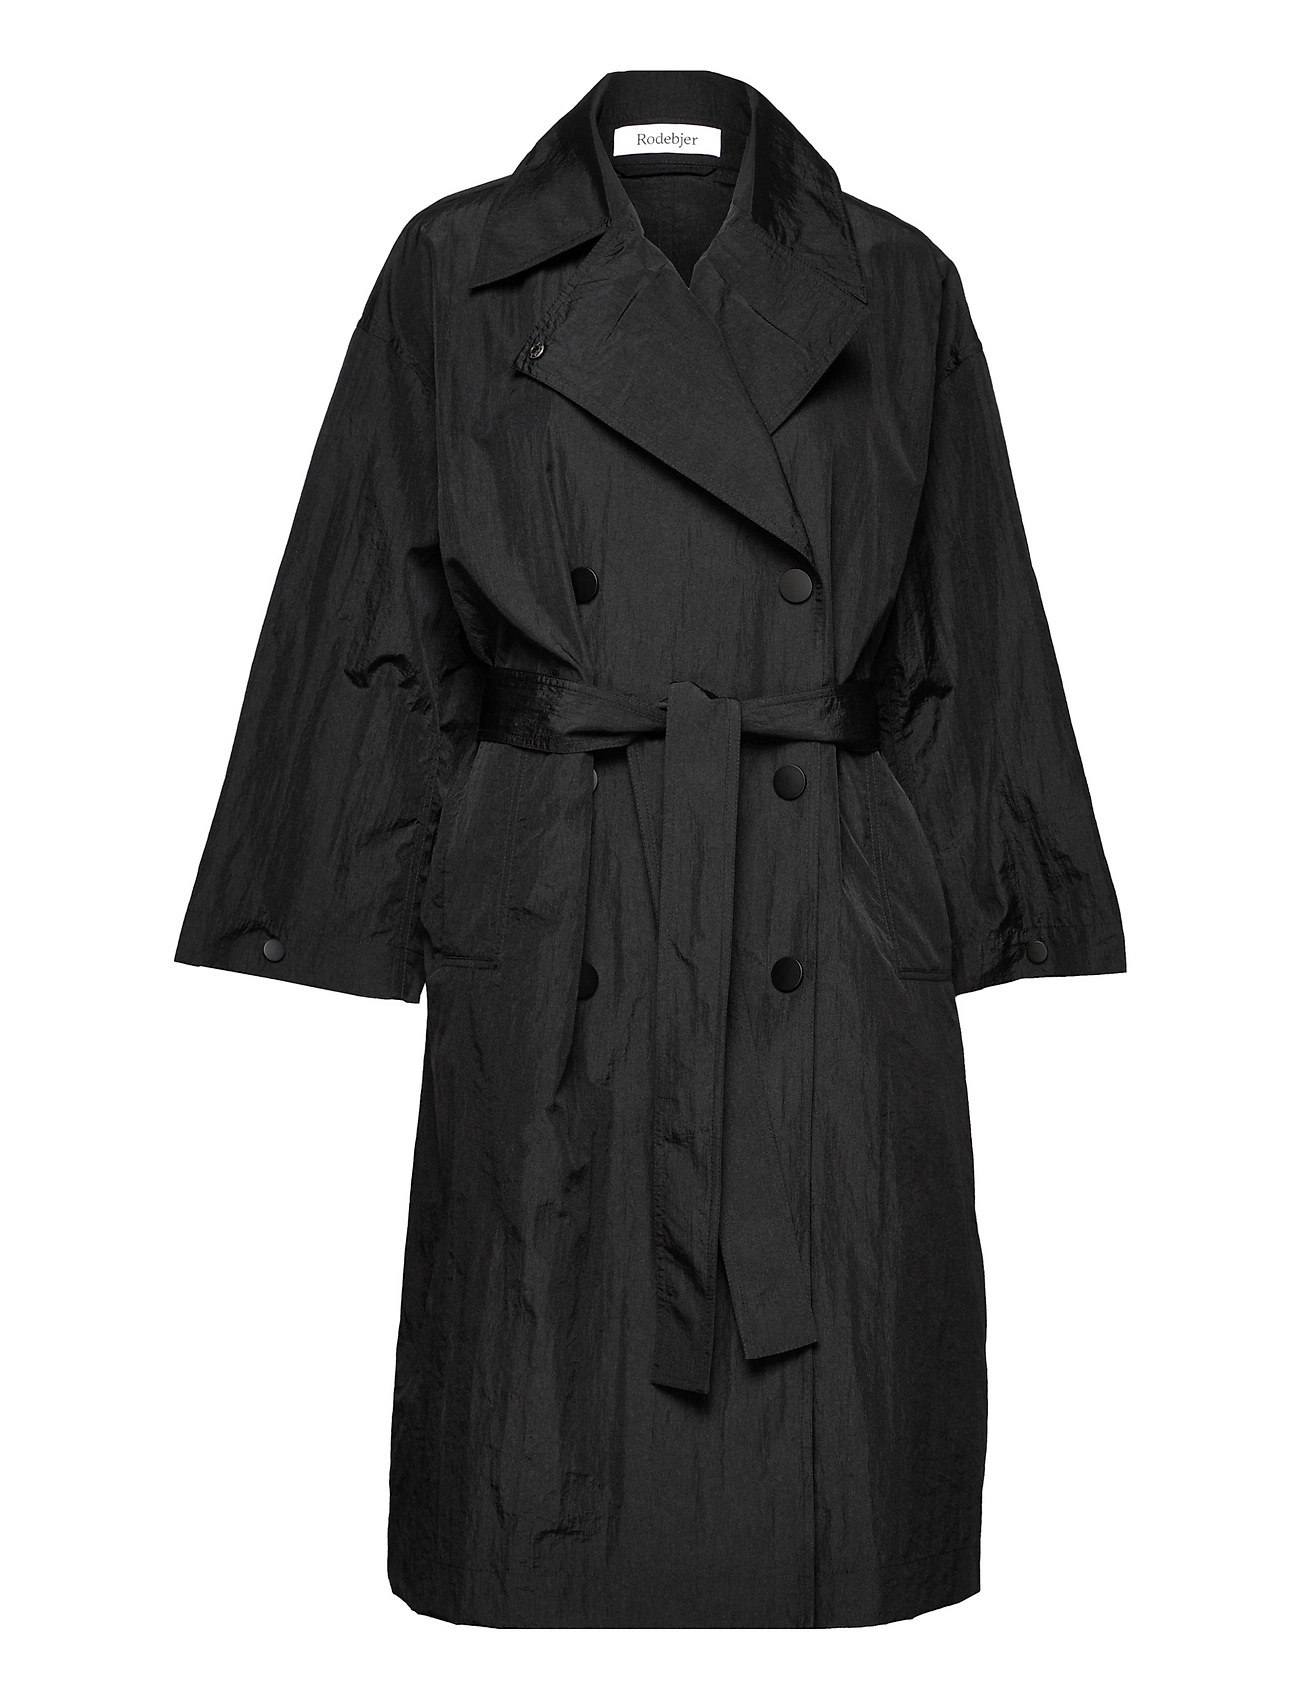 RODEBJER Rodebjer Gemma - 420 €. Buy Trench coats from RODEBJER online ...